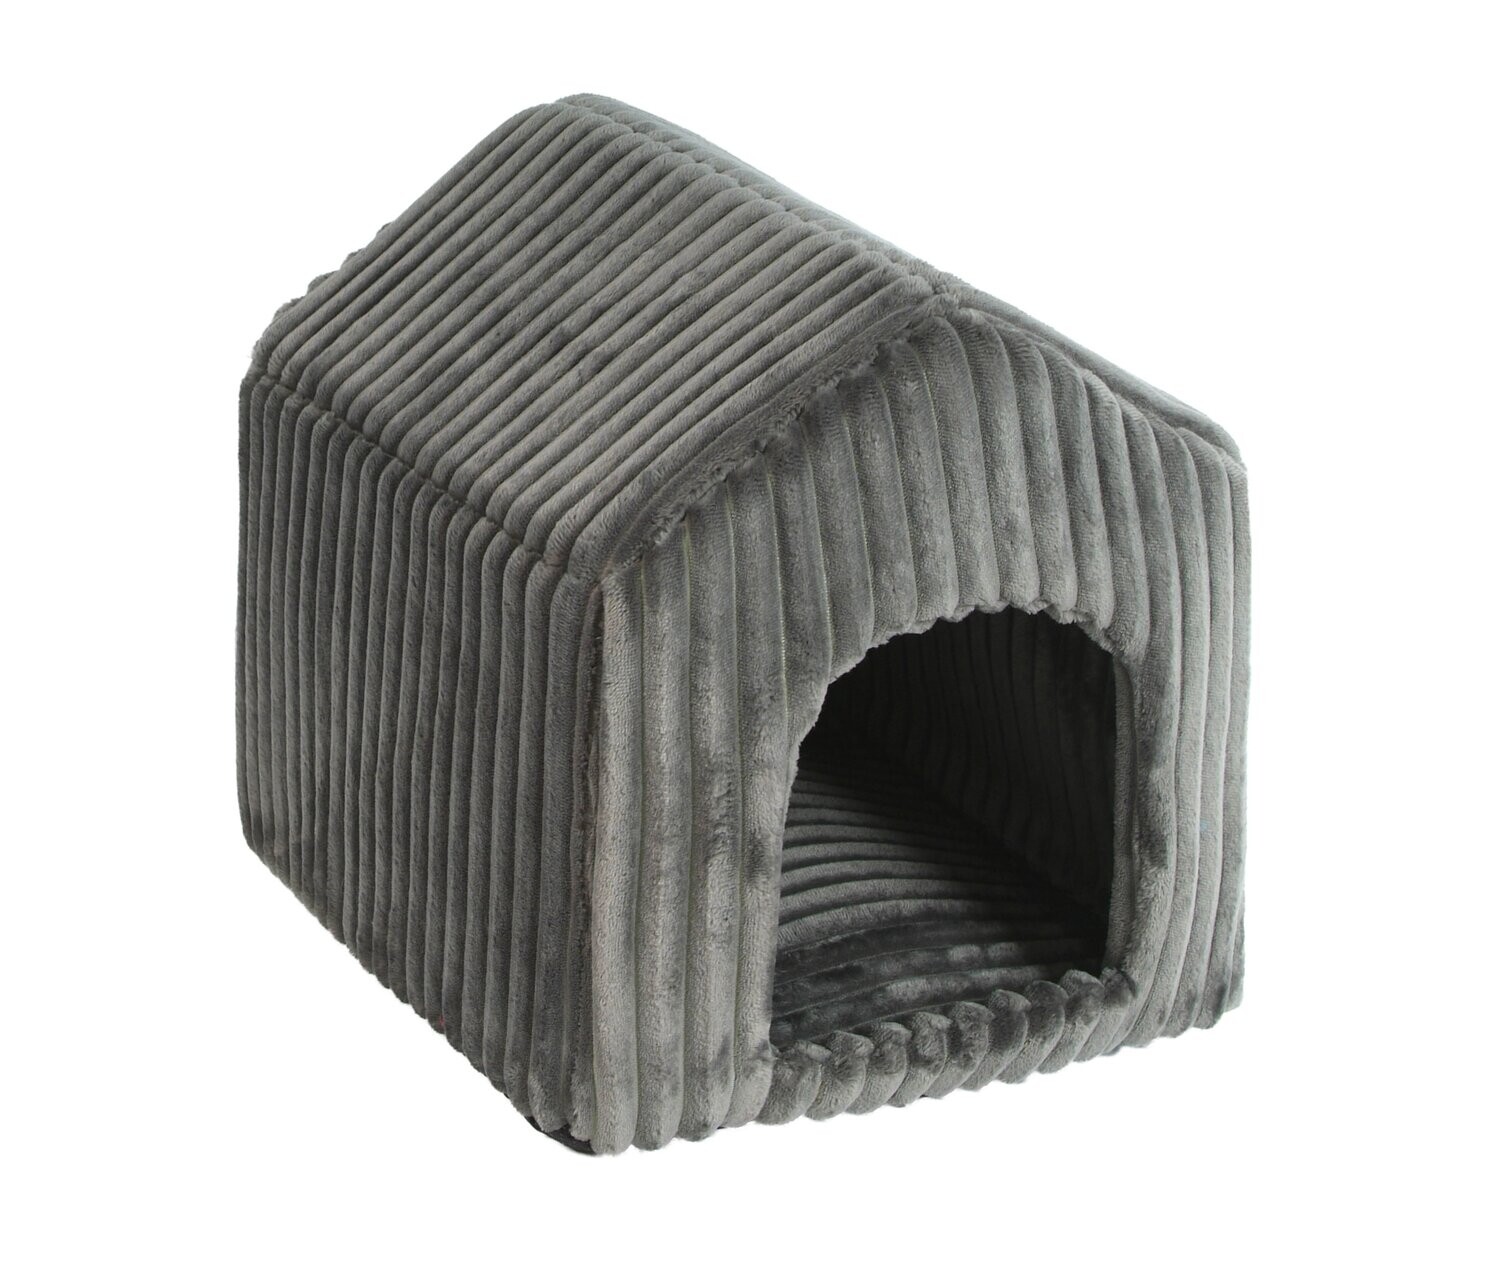 Dog House Striped, Color: Grey